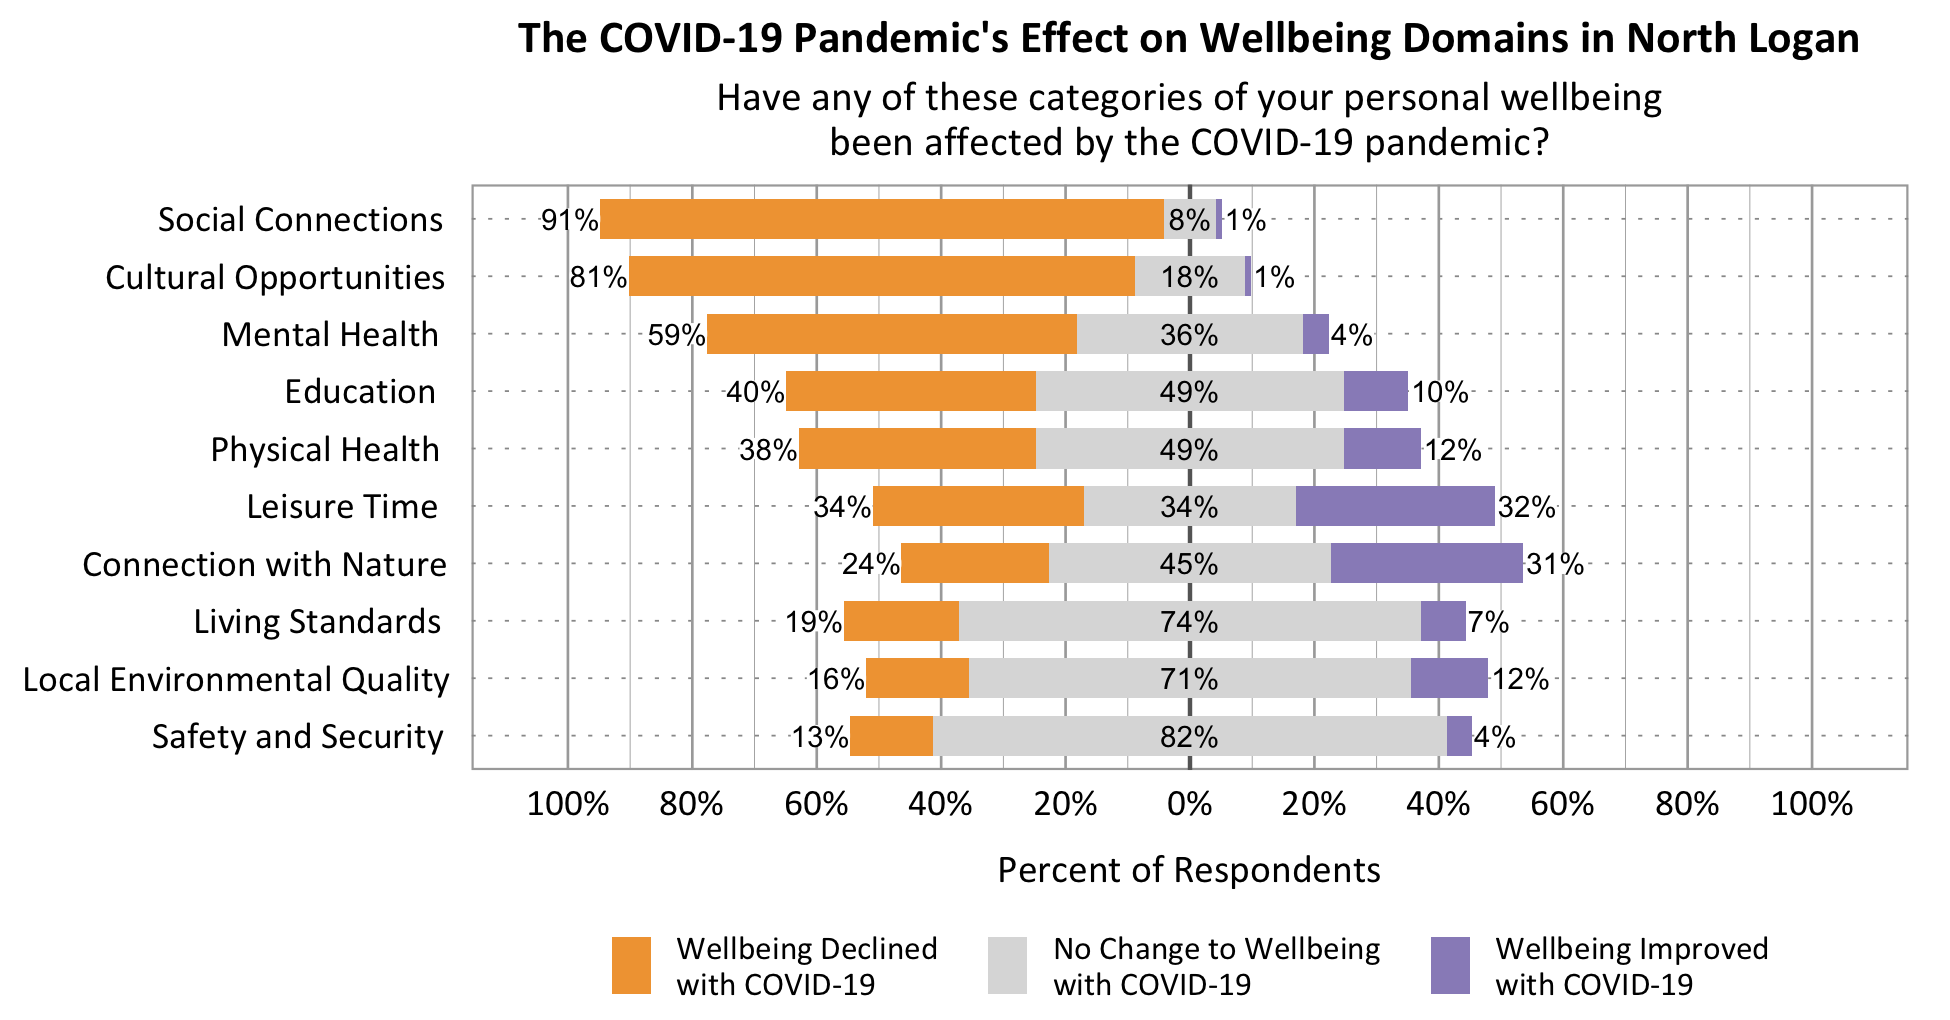 Likert Graph. Title: The COVID-19 Pandemic's effect on wellbeing domains in North Logan. Subtitle: Have any of these categories of your personal wellbeing been affected by the COVID-19 pandemic? Data – Category: Social Connections- 91% of respondents rated wellbeing declined with COVID-19, 8% of respondents rated no change to wellbeing with COVID-19, 1% of respondents rated wellbeing improved with COVID-19; Category: Cultural Opportunities- 81% of respondents rated wellbeing declined with COVID-19, 18% of respondents rated no change to wellbeing with COVID-19, 1% of respondents rated wellbeing improved with COVID-19; Category: Mental Health- 59% of respondents rated wellbeing declined with COVID-19, 36% of respondents rated no change to wellbeing with COVID-19, 4% of respondents rated wellbeing improved with COVID-19; Category: Leisure Time- 34% of respondents rated wellbeing declined with COVID-19, 34% of respondents rated no change to wellbeing with COVID-19, 32% of respondents rated wellbeing improved with COVID-19; Category: Physical Health - 38% of respondents rated wellbeing declined with COVID-19, 49% of respondents rated no change to wellbeing with COVID-19, 12% of respondents rated wellbeing improved with COVID-19; Category: Connection with Nature- 24% of respondents rated wellbeing declined with COVID-19, 45% of respondents rated no change to wellbeing with COVID-19, 31% of respondents rated wellbeing improved with COVID-19; Category: Education-  40% of respondents rated wellbeing declined with COVID-19, 49% of respondents rated no change to wellbeing with COVID-19, 10% of respondents rated wellbeing improved with COVID-19; Category: Living Standards- 19% of respondents rated wellbeing declined with COVID-19, 74% of respondents rated no change to wellbeing with COVID-19, 7% of respondents rated wellbeing improved with COVID-19; Category:  Local Environmental Quality- 16% of respondents rated wellbeing declined with COVID-19, 71% of respondents rated no change to wellbeing with COVID-19, 12% of respondents rated wellbeing improved with COVID-19; Category: Safety and Security- 13% of respondents rated wellbeing declined with COVID-19, 82% of respondents rated no change to wellbeing with COVID-19, 4% of respondents rated wellbeing improved with COVID-19.